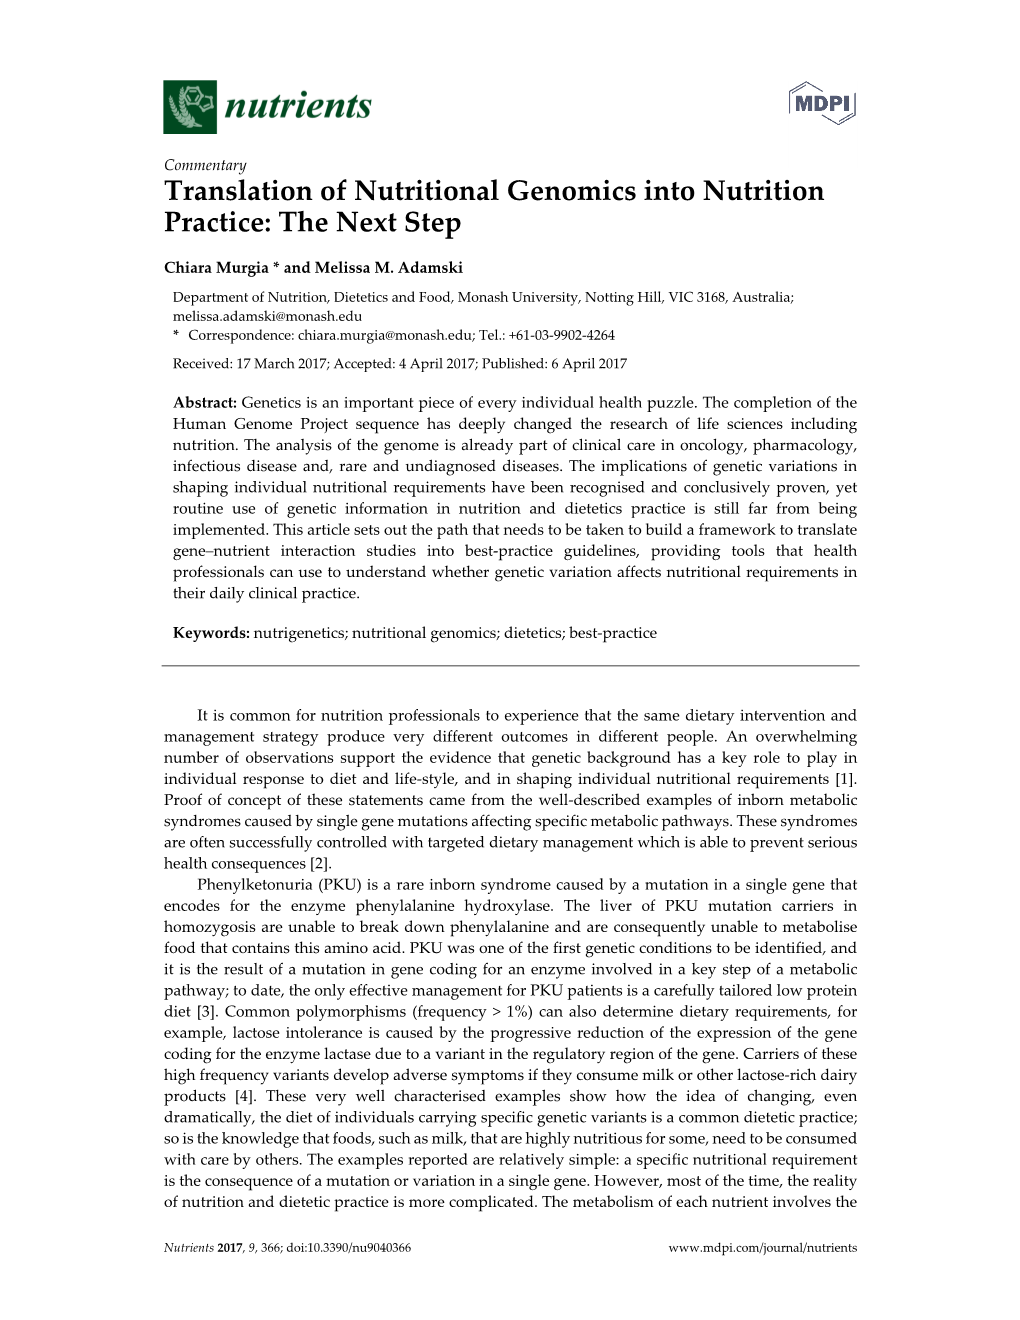 Translation of Nutritional Genomics Into Nutrition Practice: the Next Step